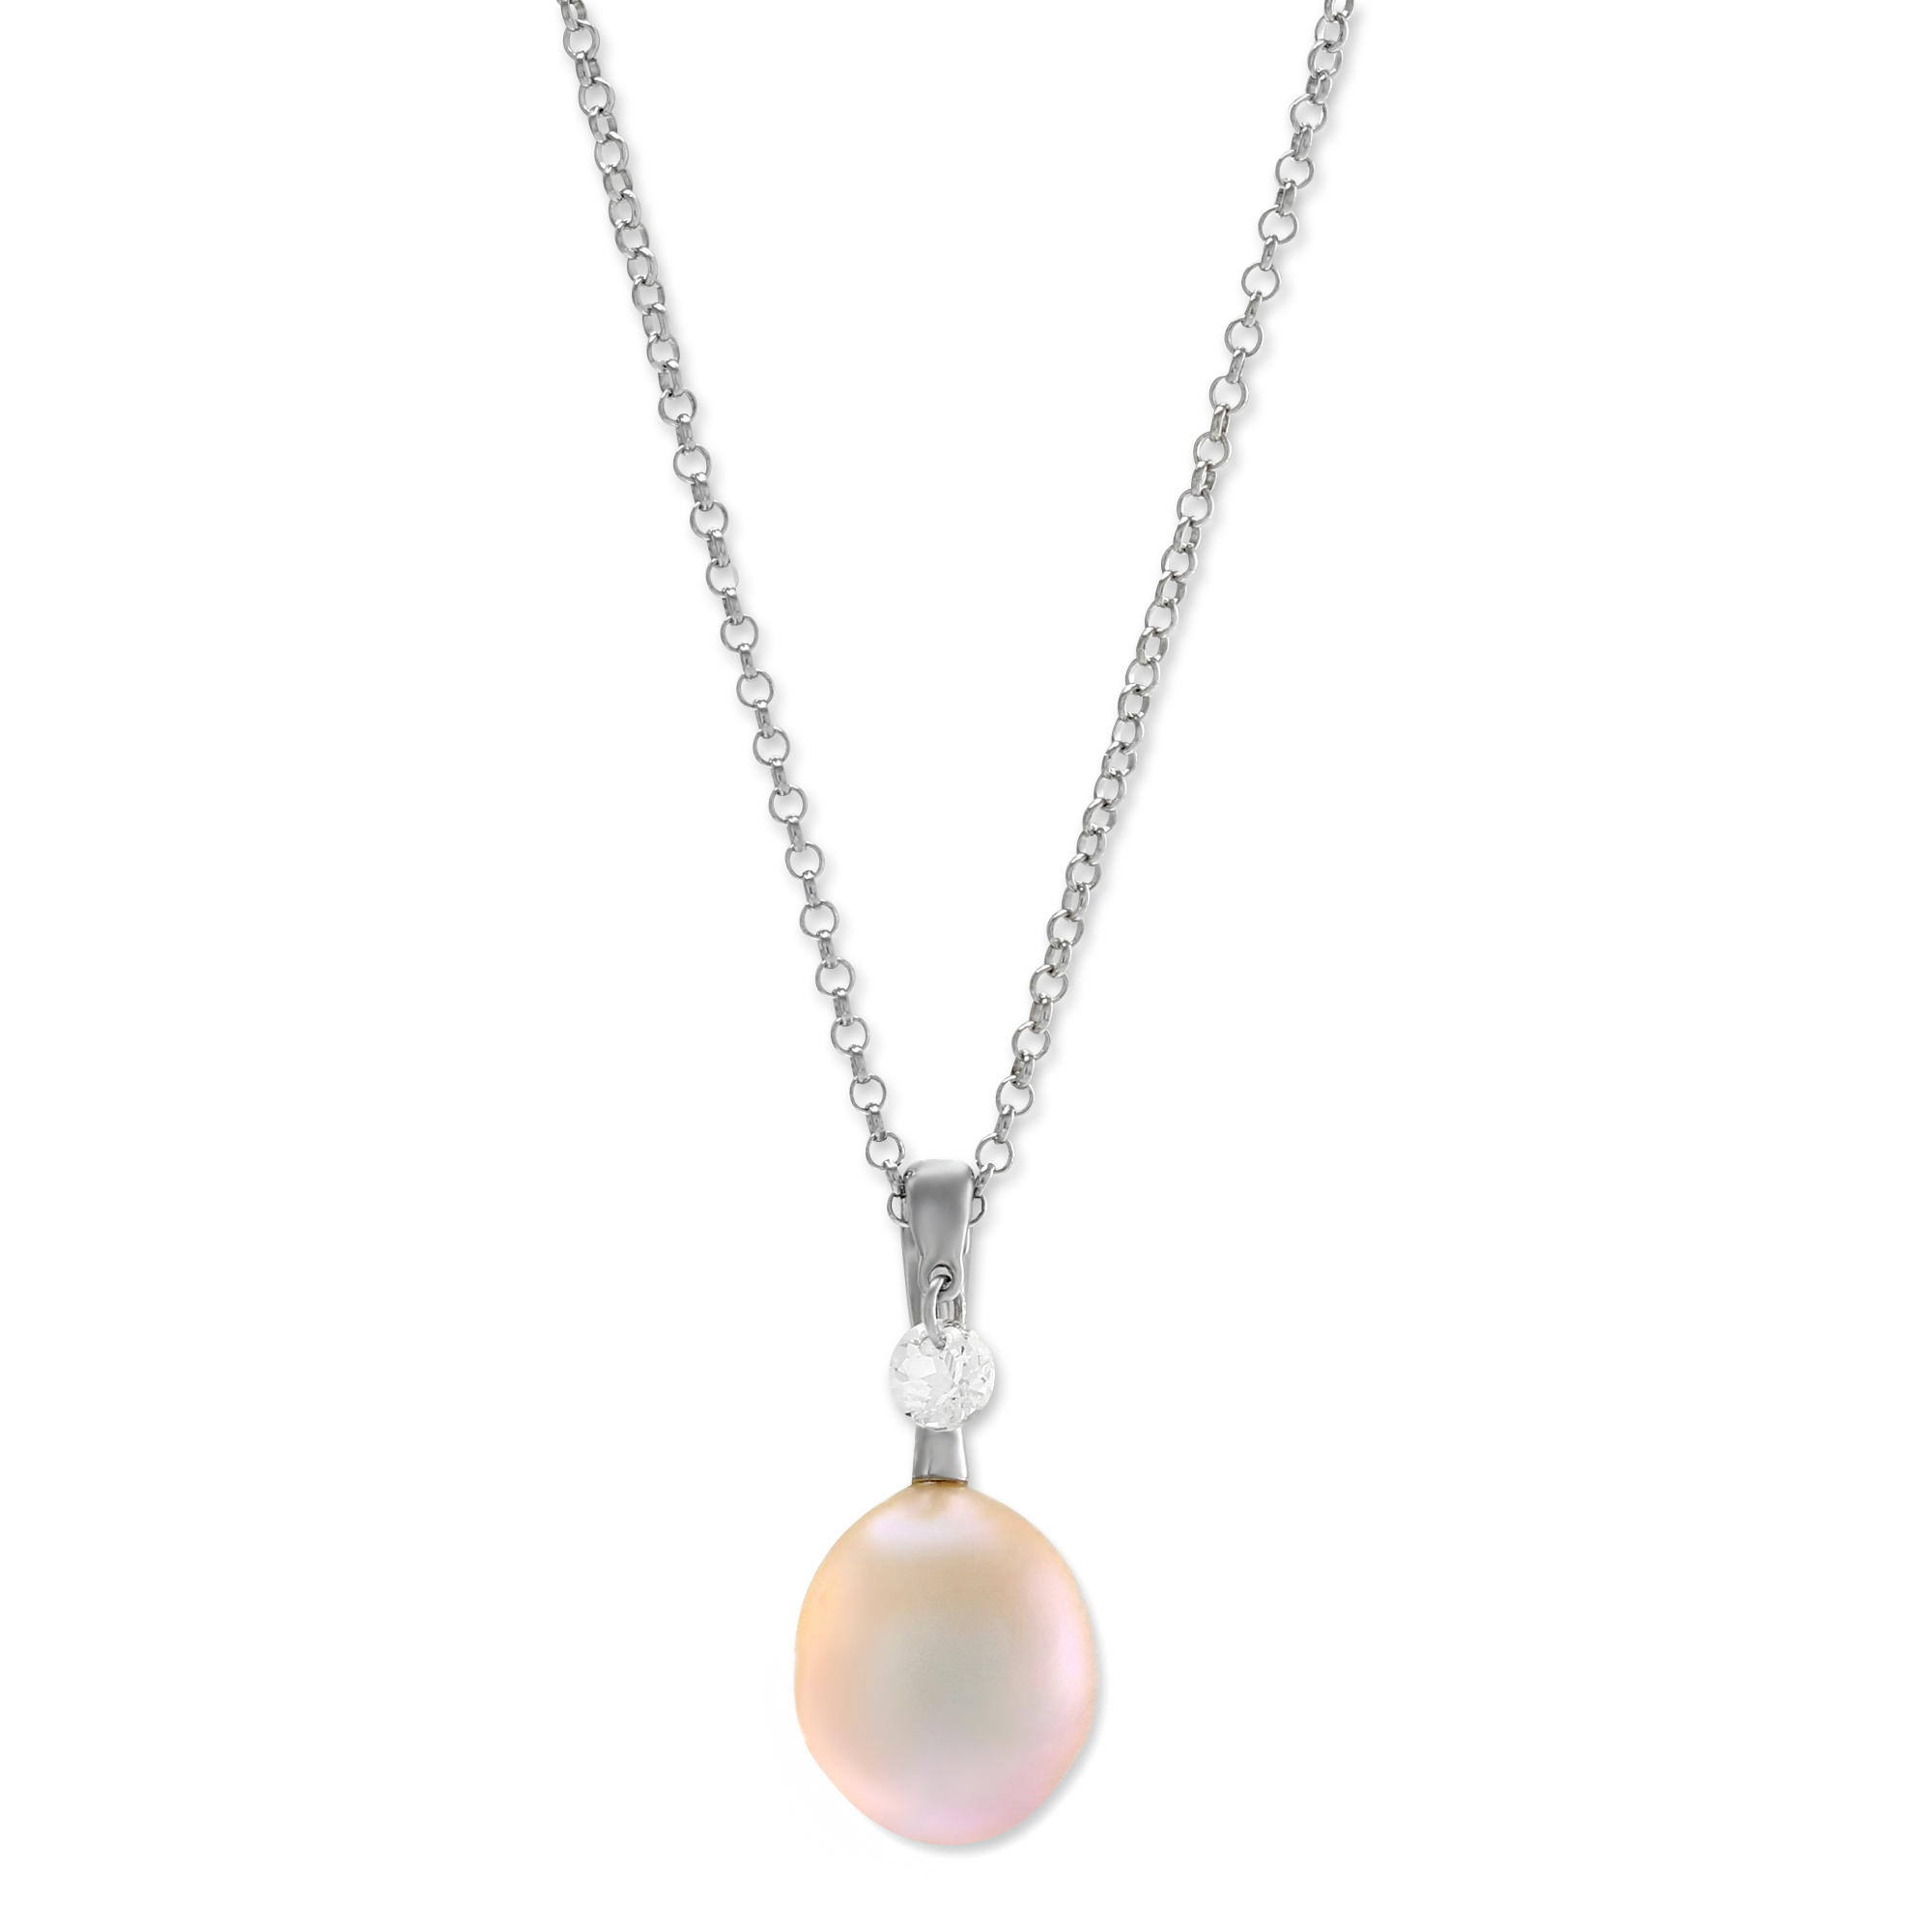 TARA Pearls Sterling Silver Peach Freshwater Cultured Pearl and White Topaz Pendant, 18